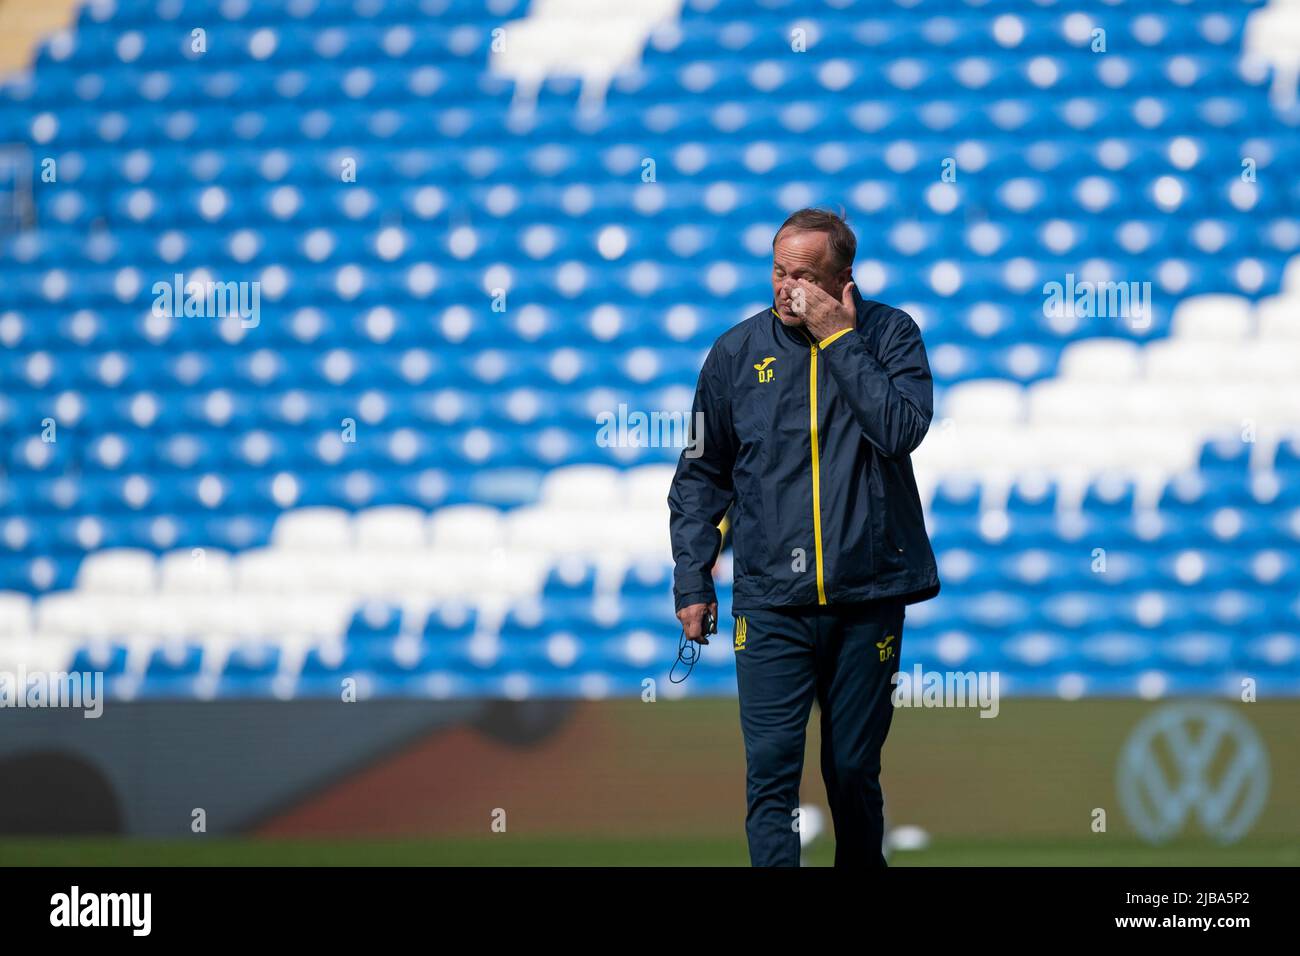 Cardiff, Wales, UK. 4th June, 2022. Head coach Oleksandr Petrakov during Ukraine national football team training at the Cardiff City Stadium ahead of the FIFA World Cup play-off final match against Wales. Credit: Mark Hawkins/Alamy Live News Stock Photo